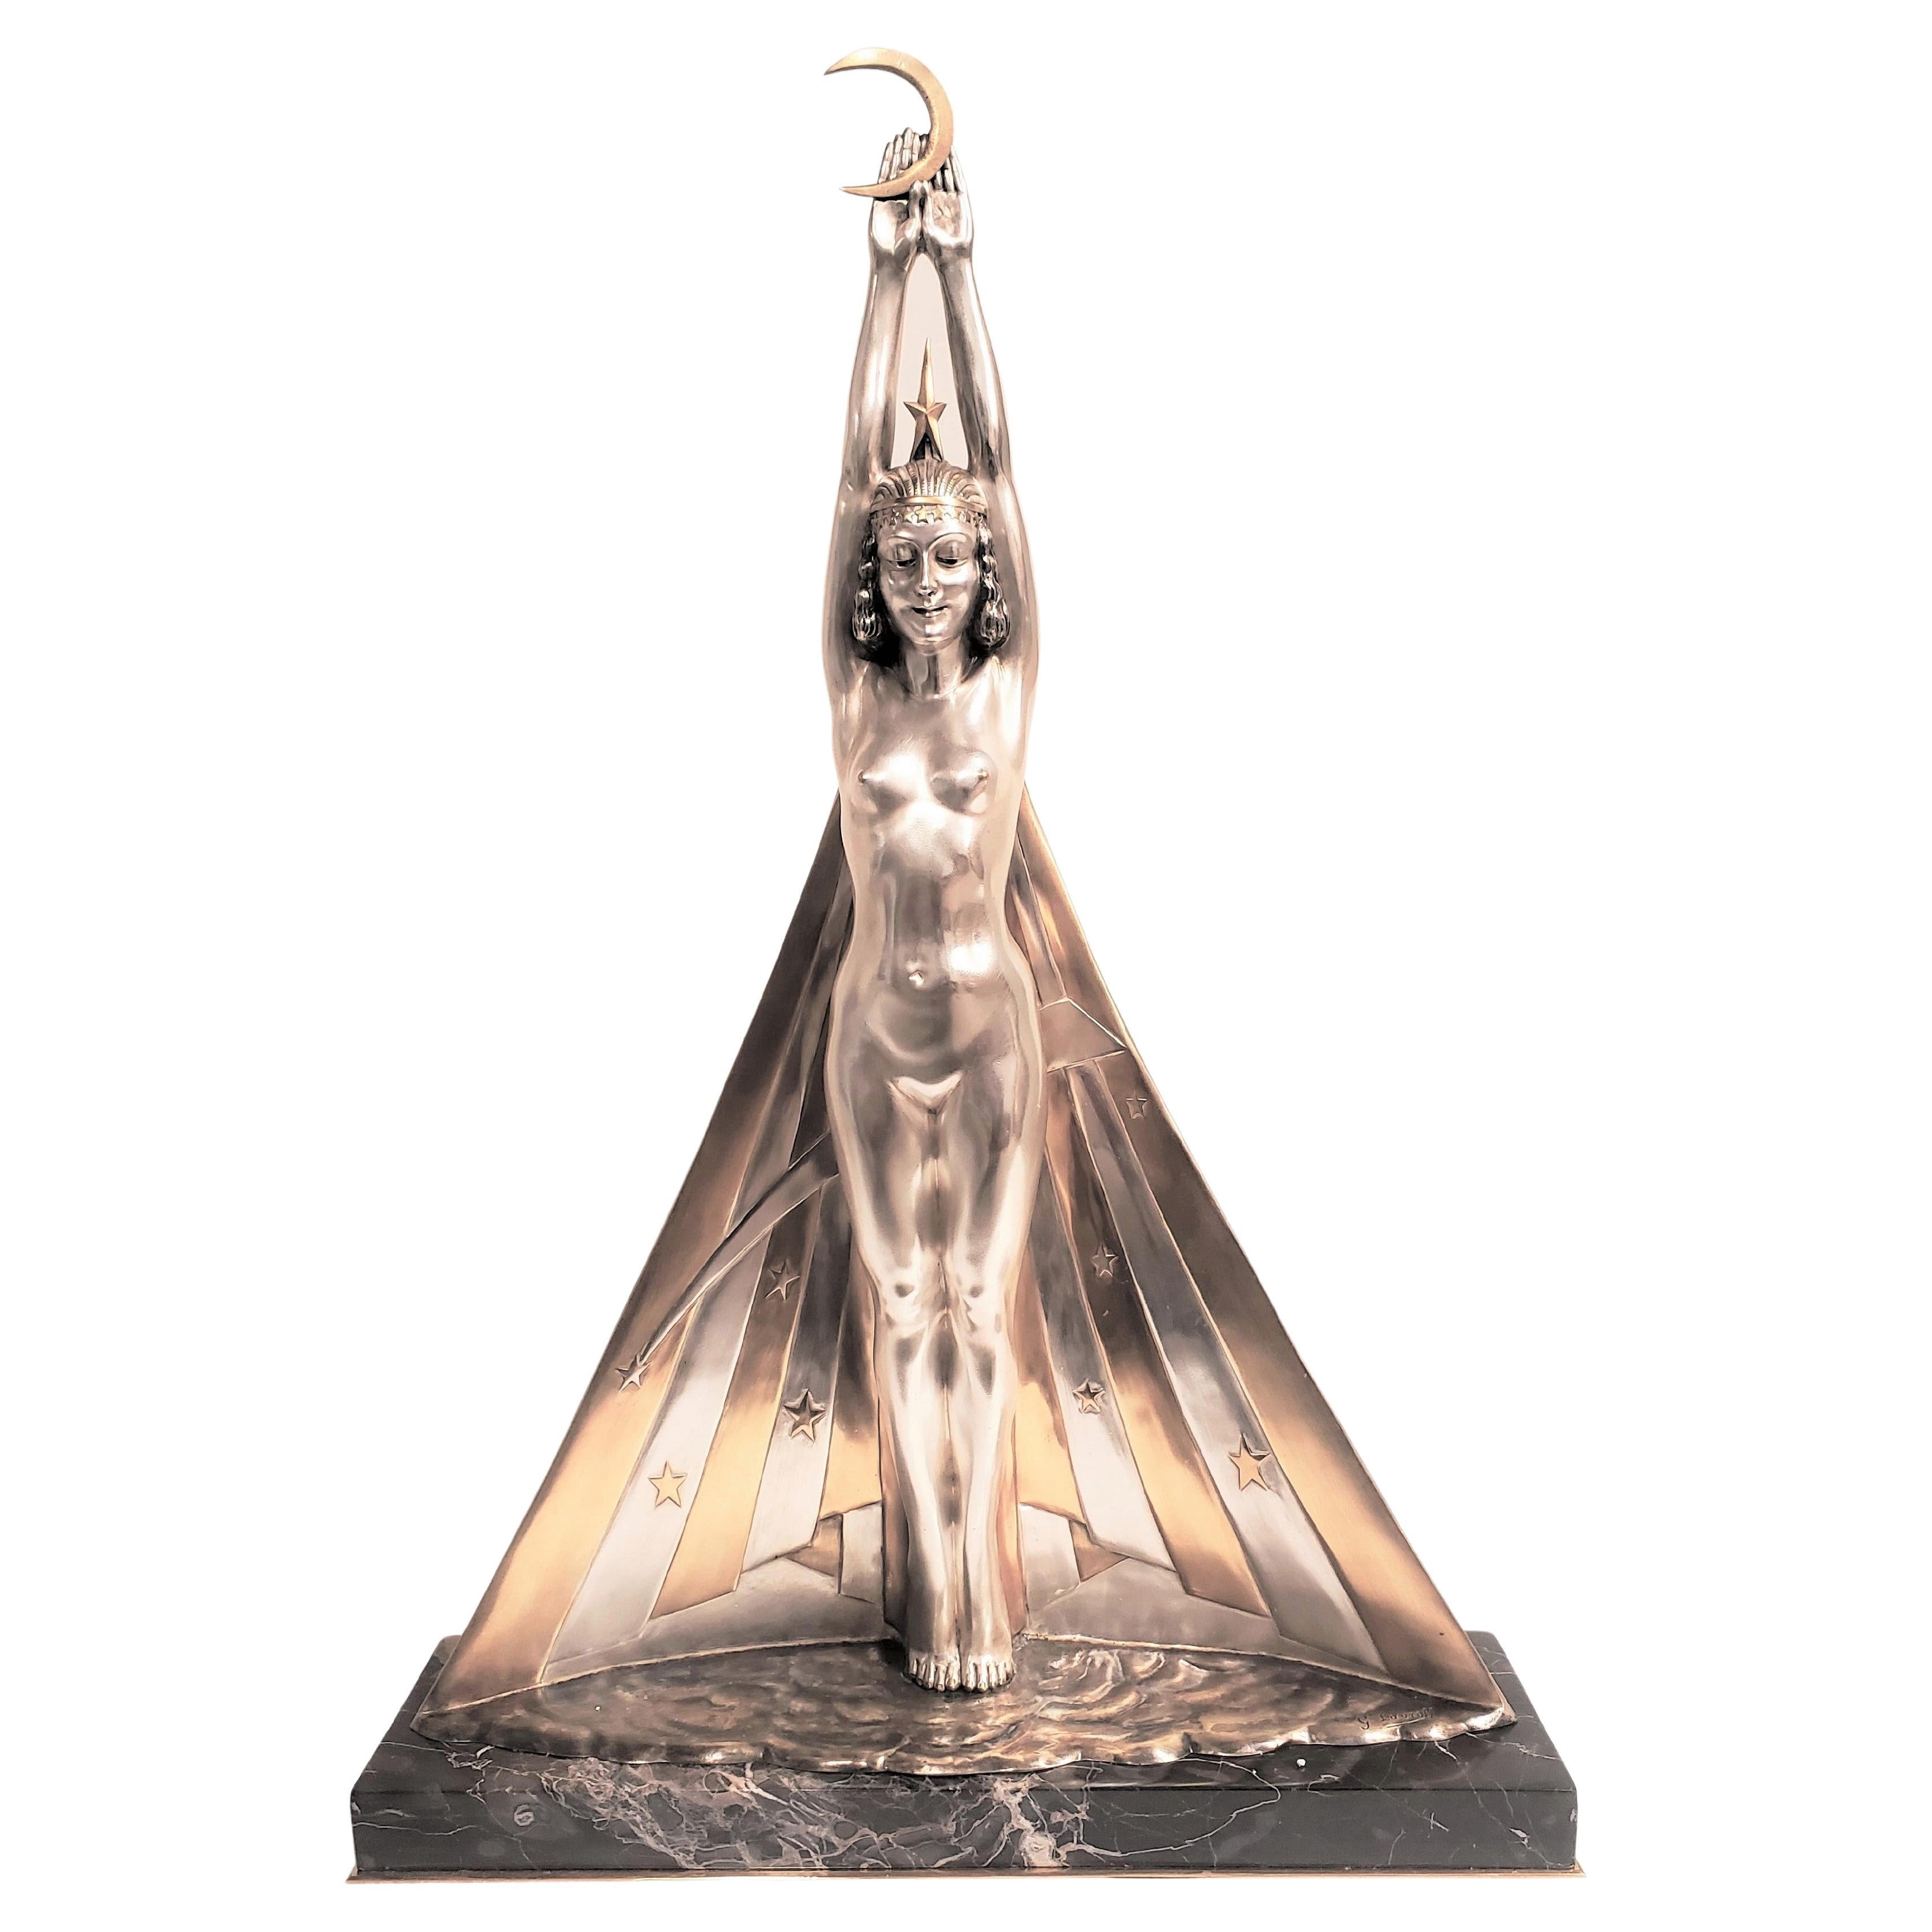 An exceptionally large and rare French Art Deco original bronze sculpture circa 1927 by a well known artist Georges Lavaroff (1895-1991)
 It's quite uncommon to find this very large size and notably featuring the silver and parcel gilt finish.
The